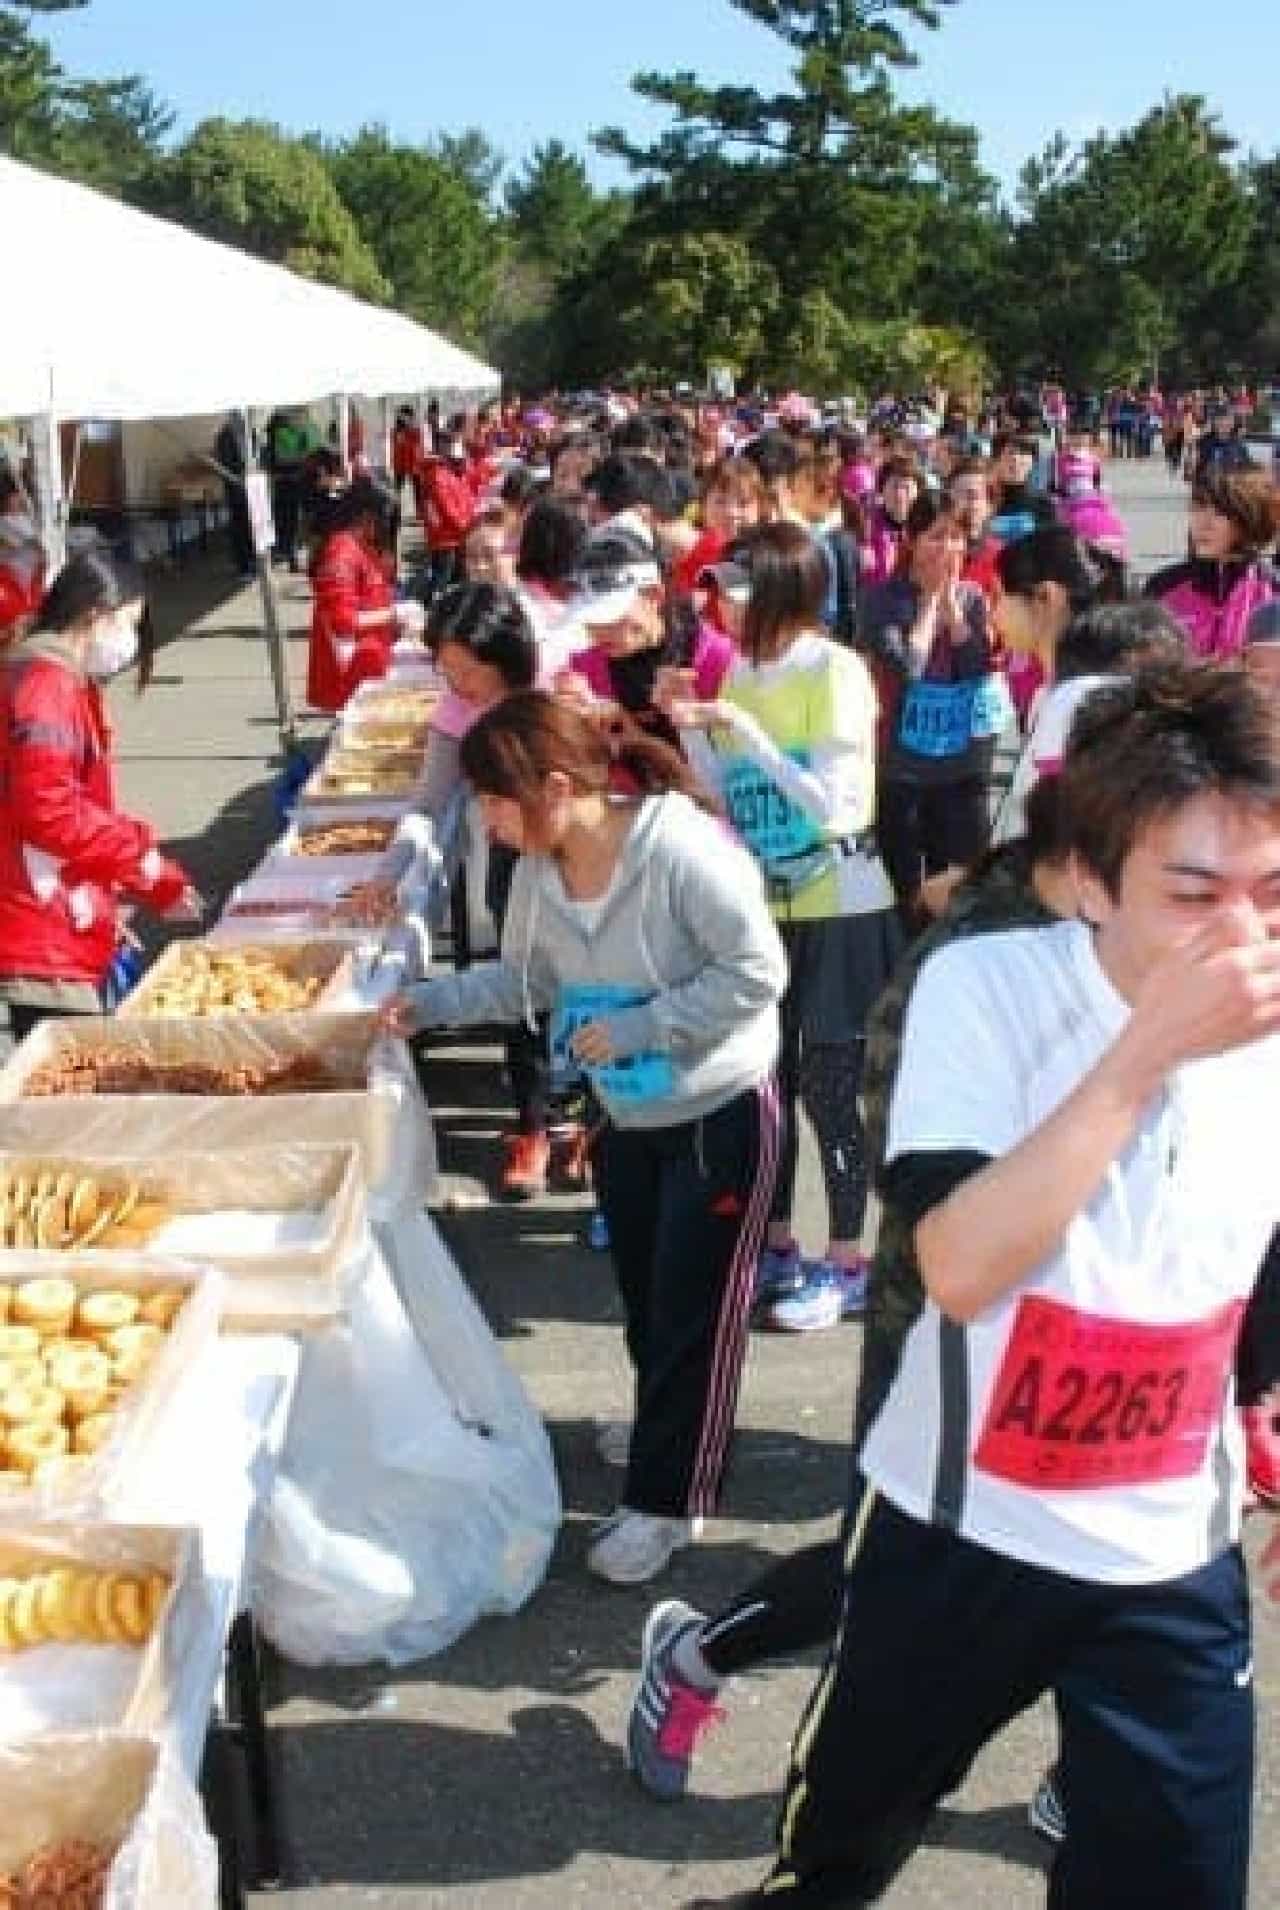 You don't have to eat while running